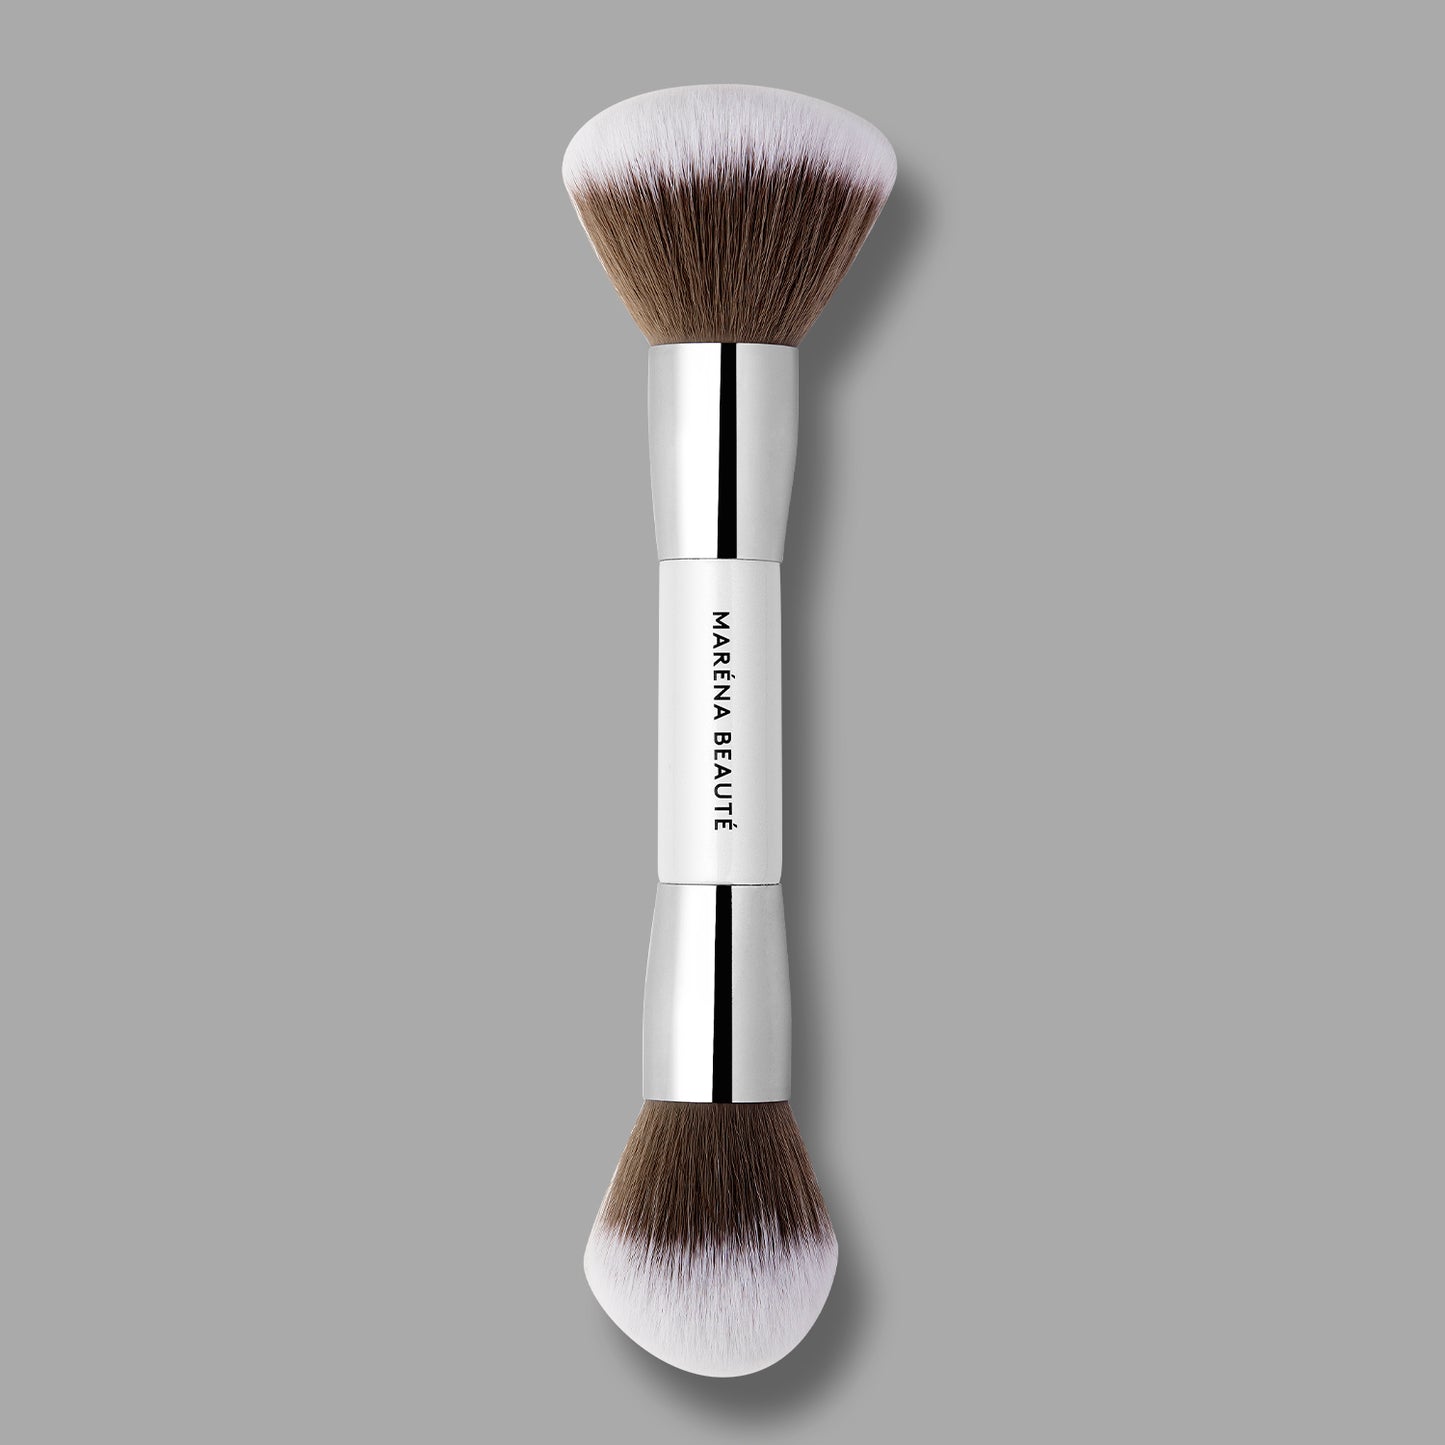 N° 2 DUAL-ENDED POWDER AND BRONZER BRUSH